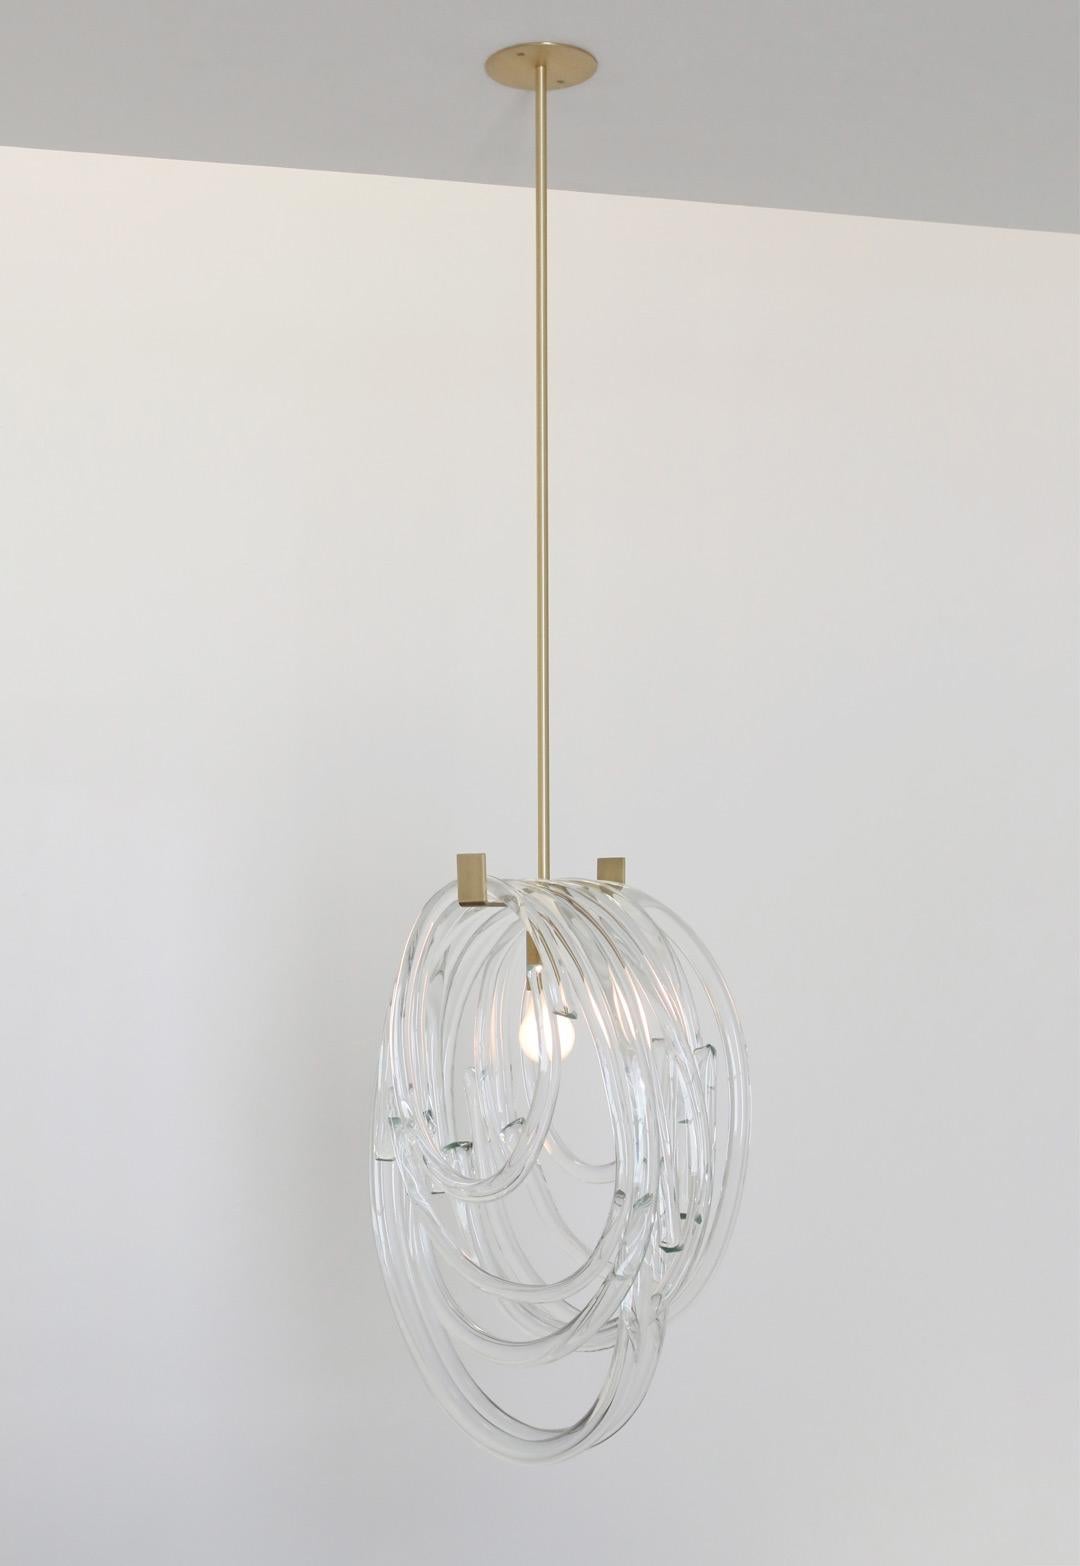 Solid loops of handblown glass serve as a shade for this sculptural pendant. The glass loops come in different sizes, showcasing the amazing quality and clarity of the Czech glass. Each loop is made by hand, so each is unique and slightly different,